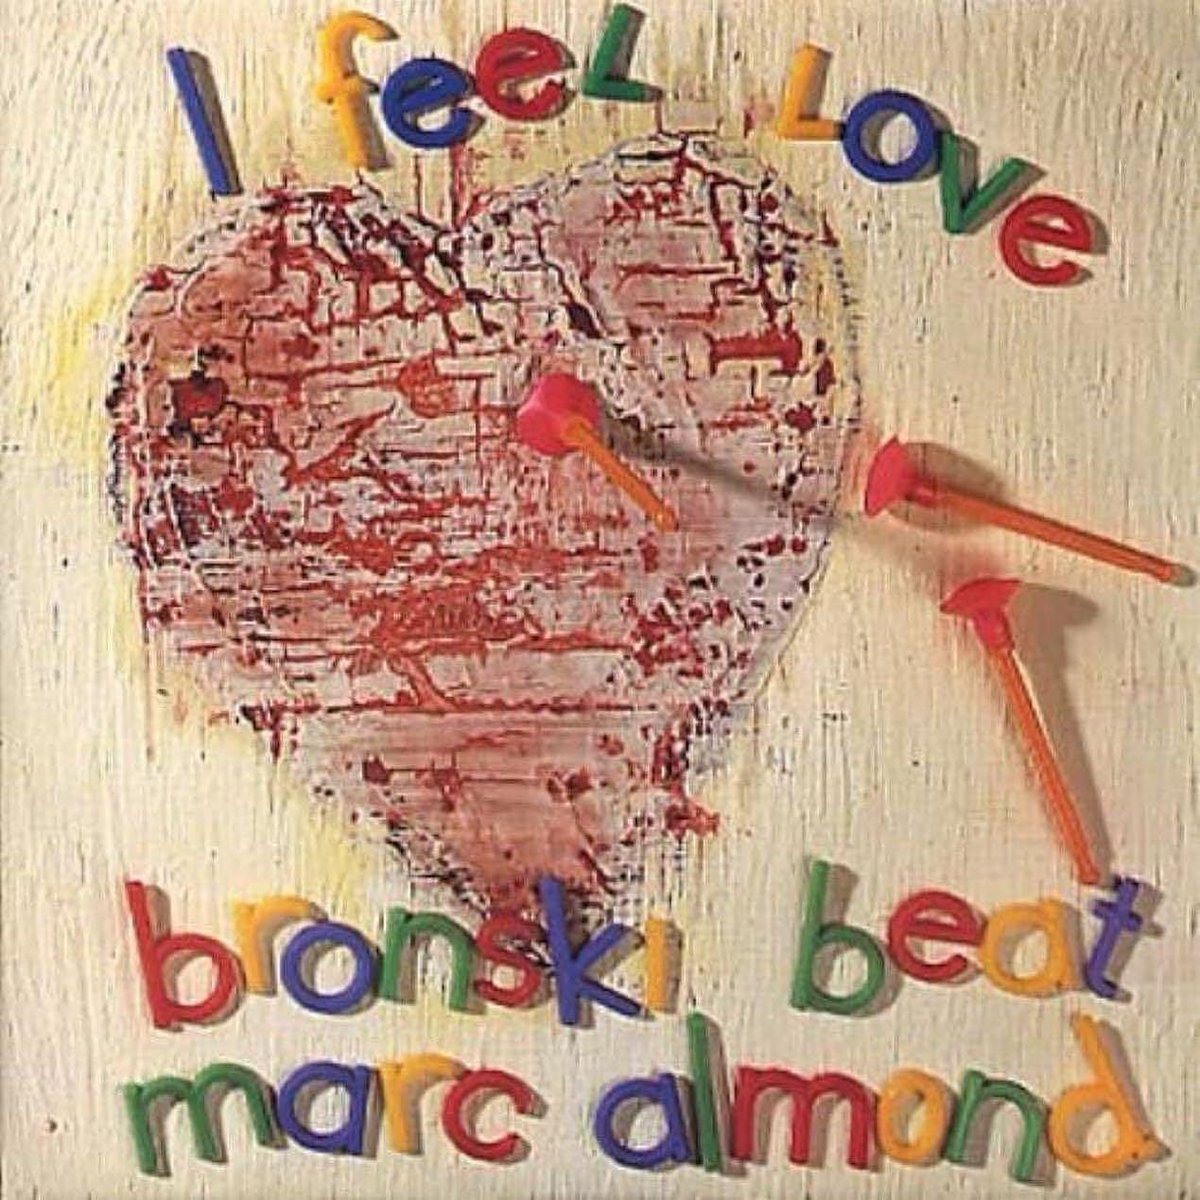 Happy anniversary to Bronski Beat and Marc Almond’s version of “I Feel Love”. Released this week in 1985. #bronskibeat #marcalmond #ifeellove #theageofconsent